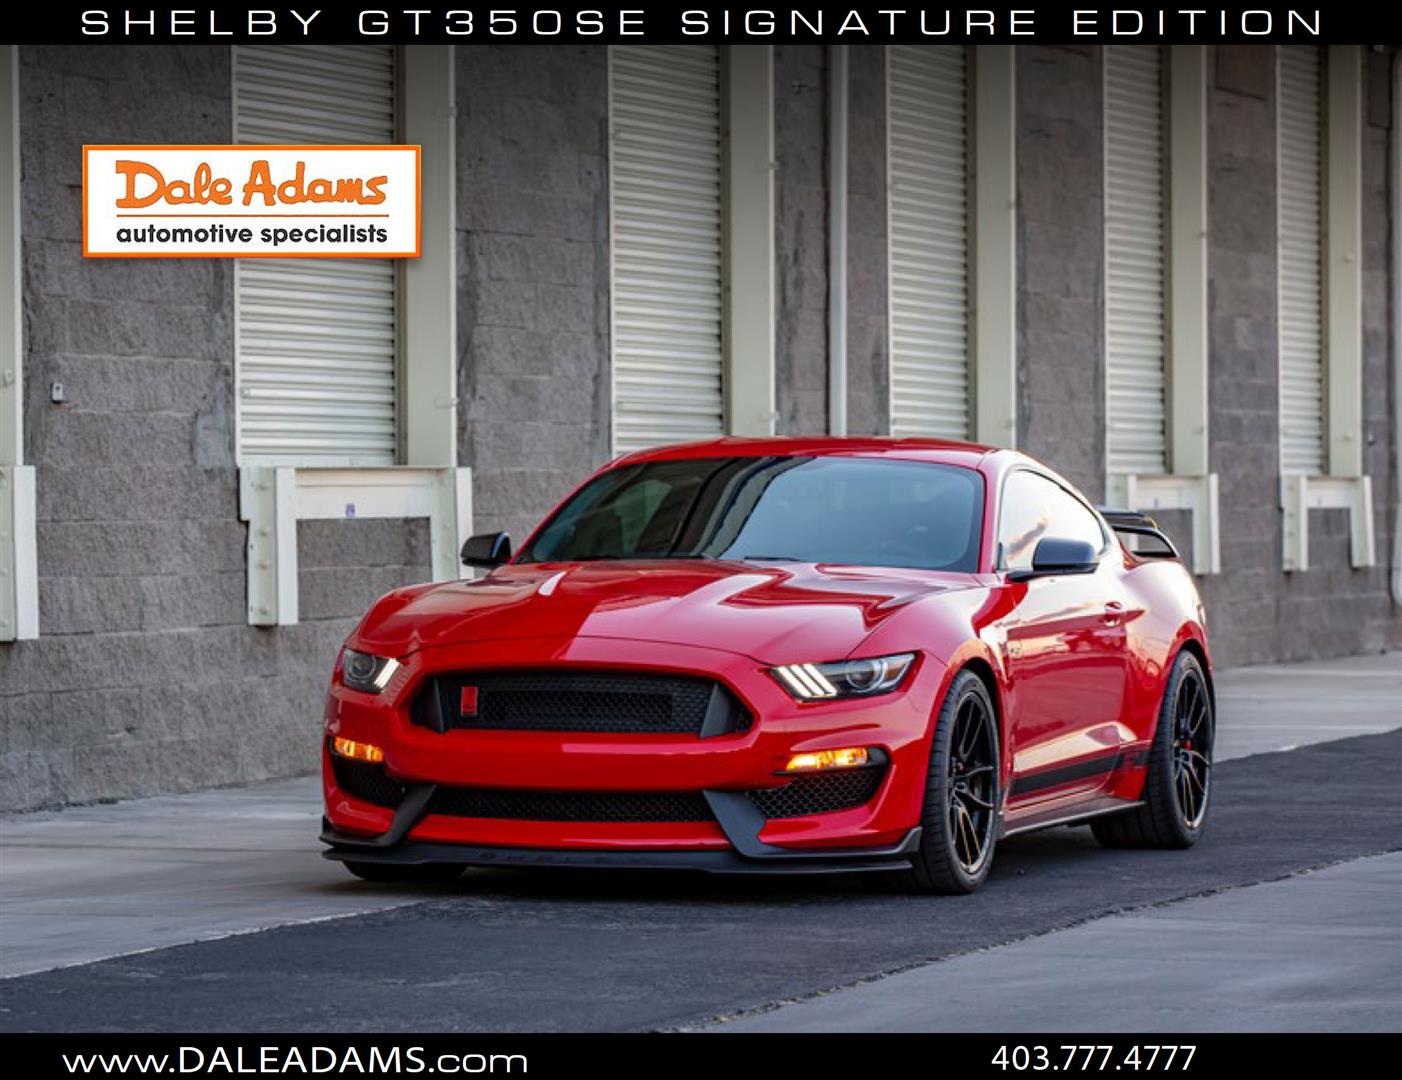 SHELBY GT500 SIGNATURE EDITION